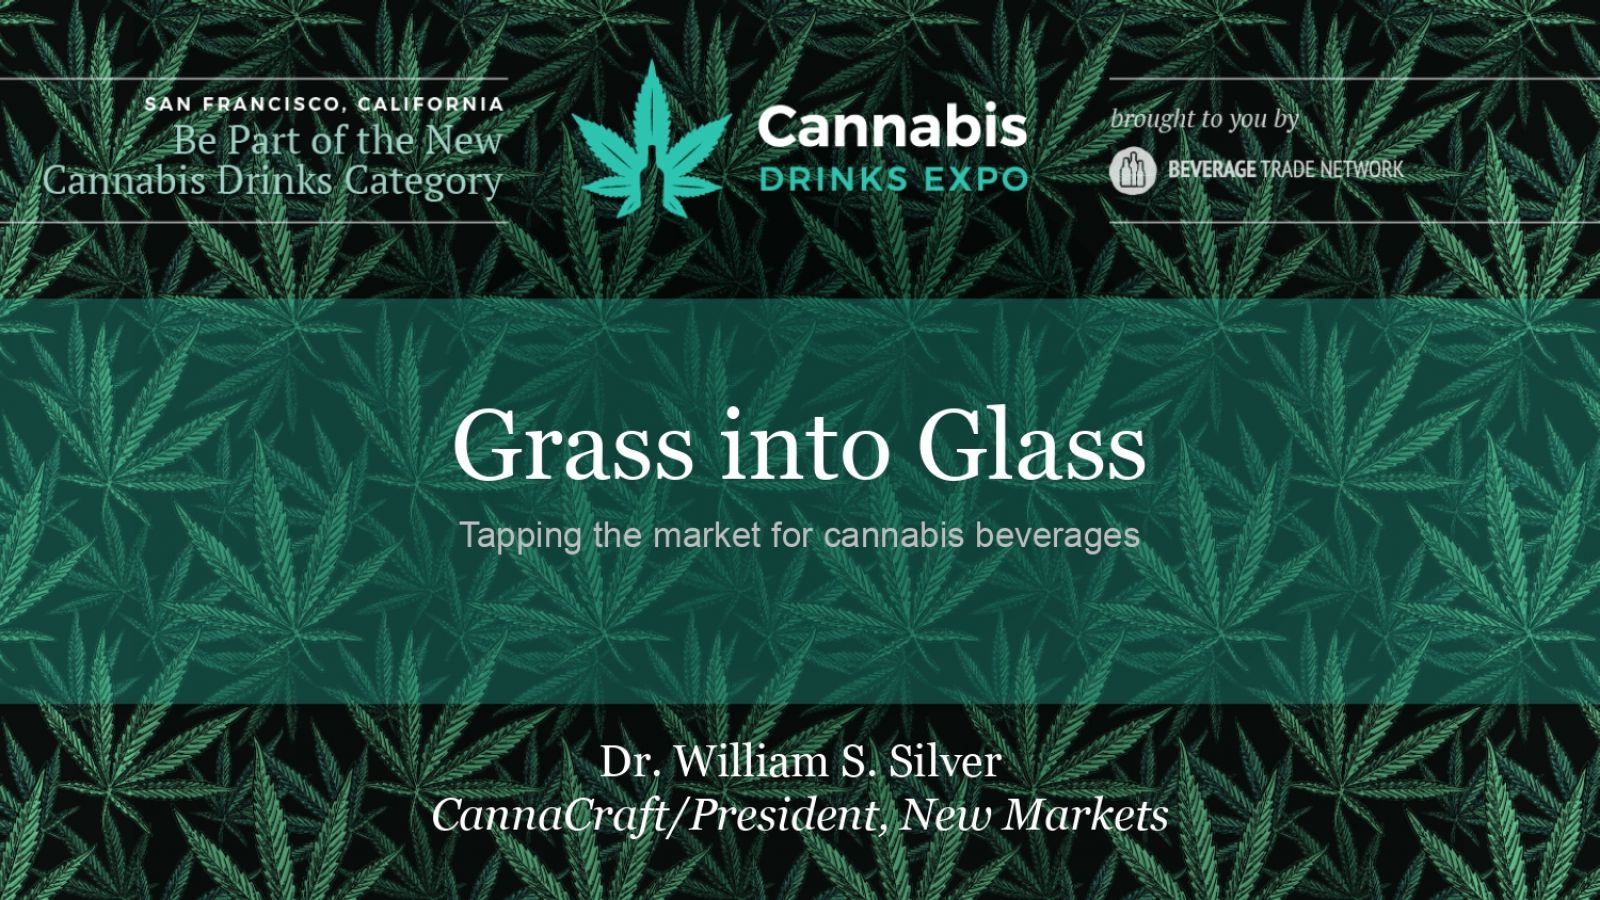 Photo for: Grass into Glass by Dr. William Silver at Cannabis Drinks Expo